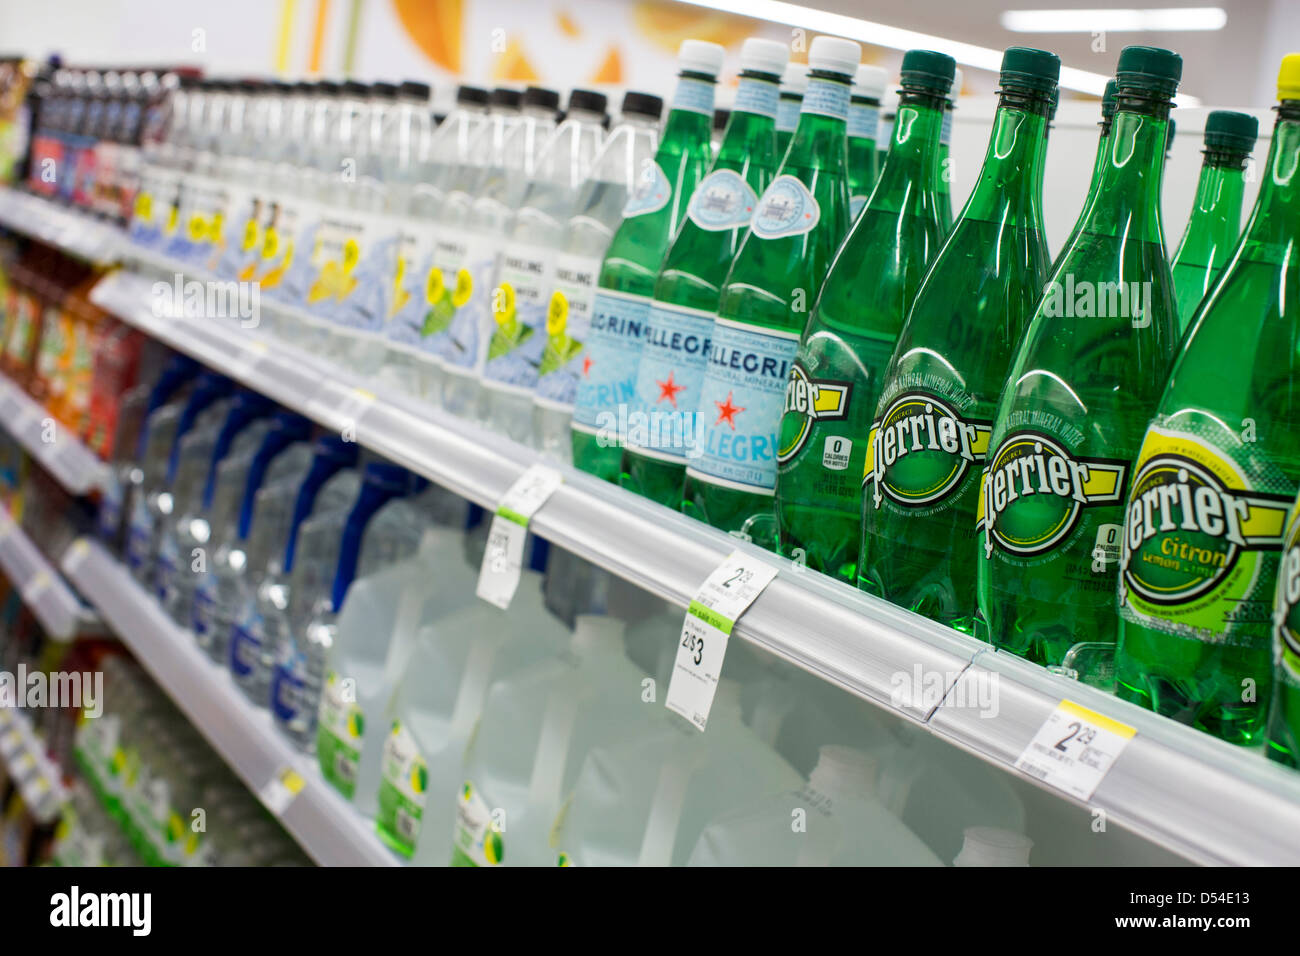 Perrier and San Pellegrino bottled water on display at a Walgreens Flagship store. Stock Photo